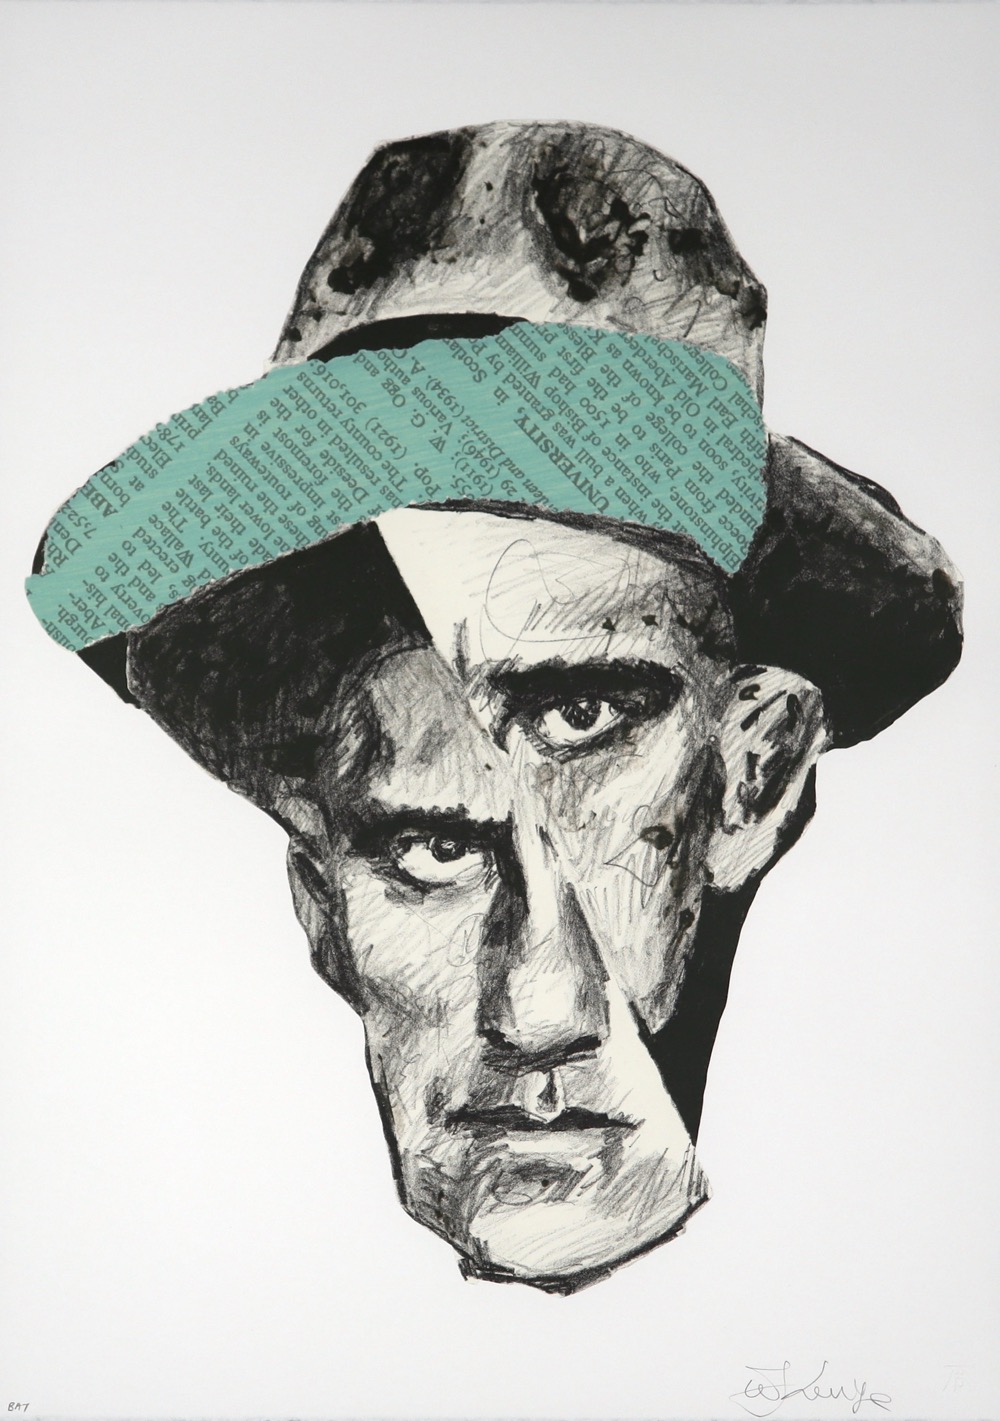 Portrait of Vladimir Mayakovsky by William Kentridge facing viewer wearing a hat, face split diagonally from top left referencing collage on white background